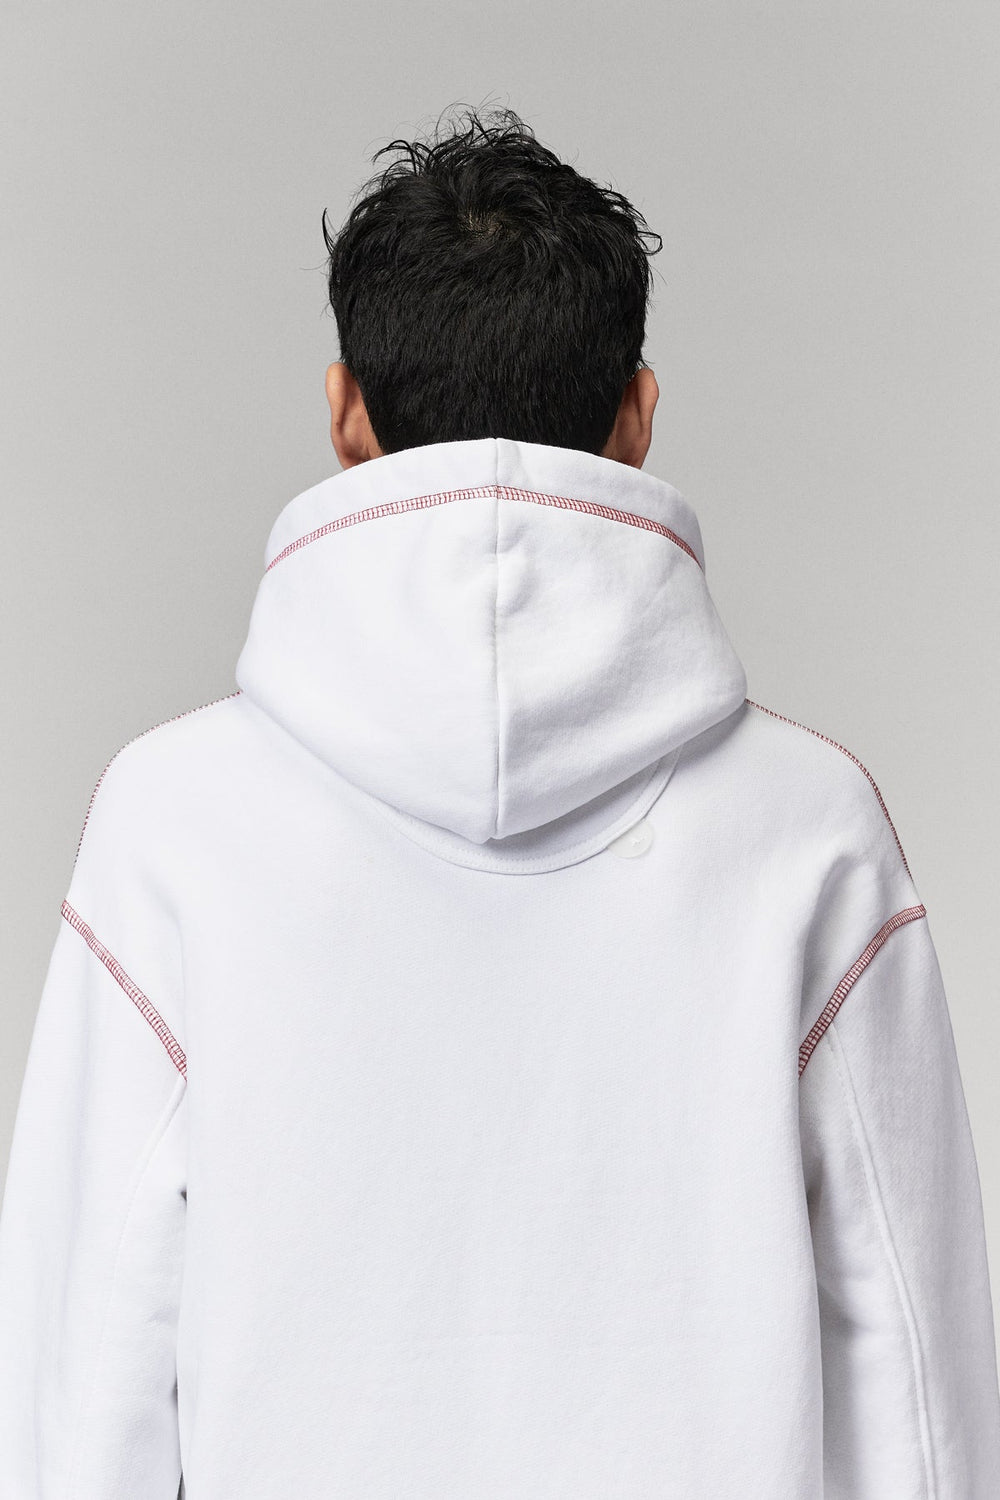 THE ARRIVALS RESOURCE HOODIE